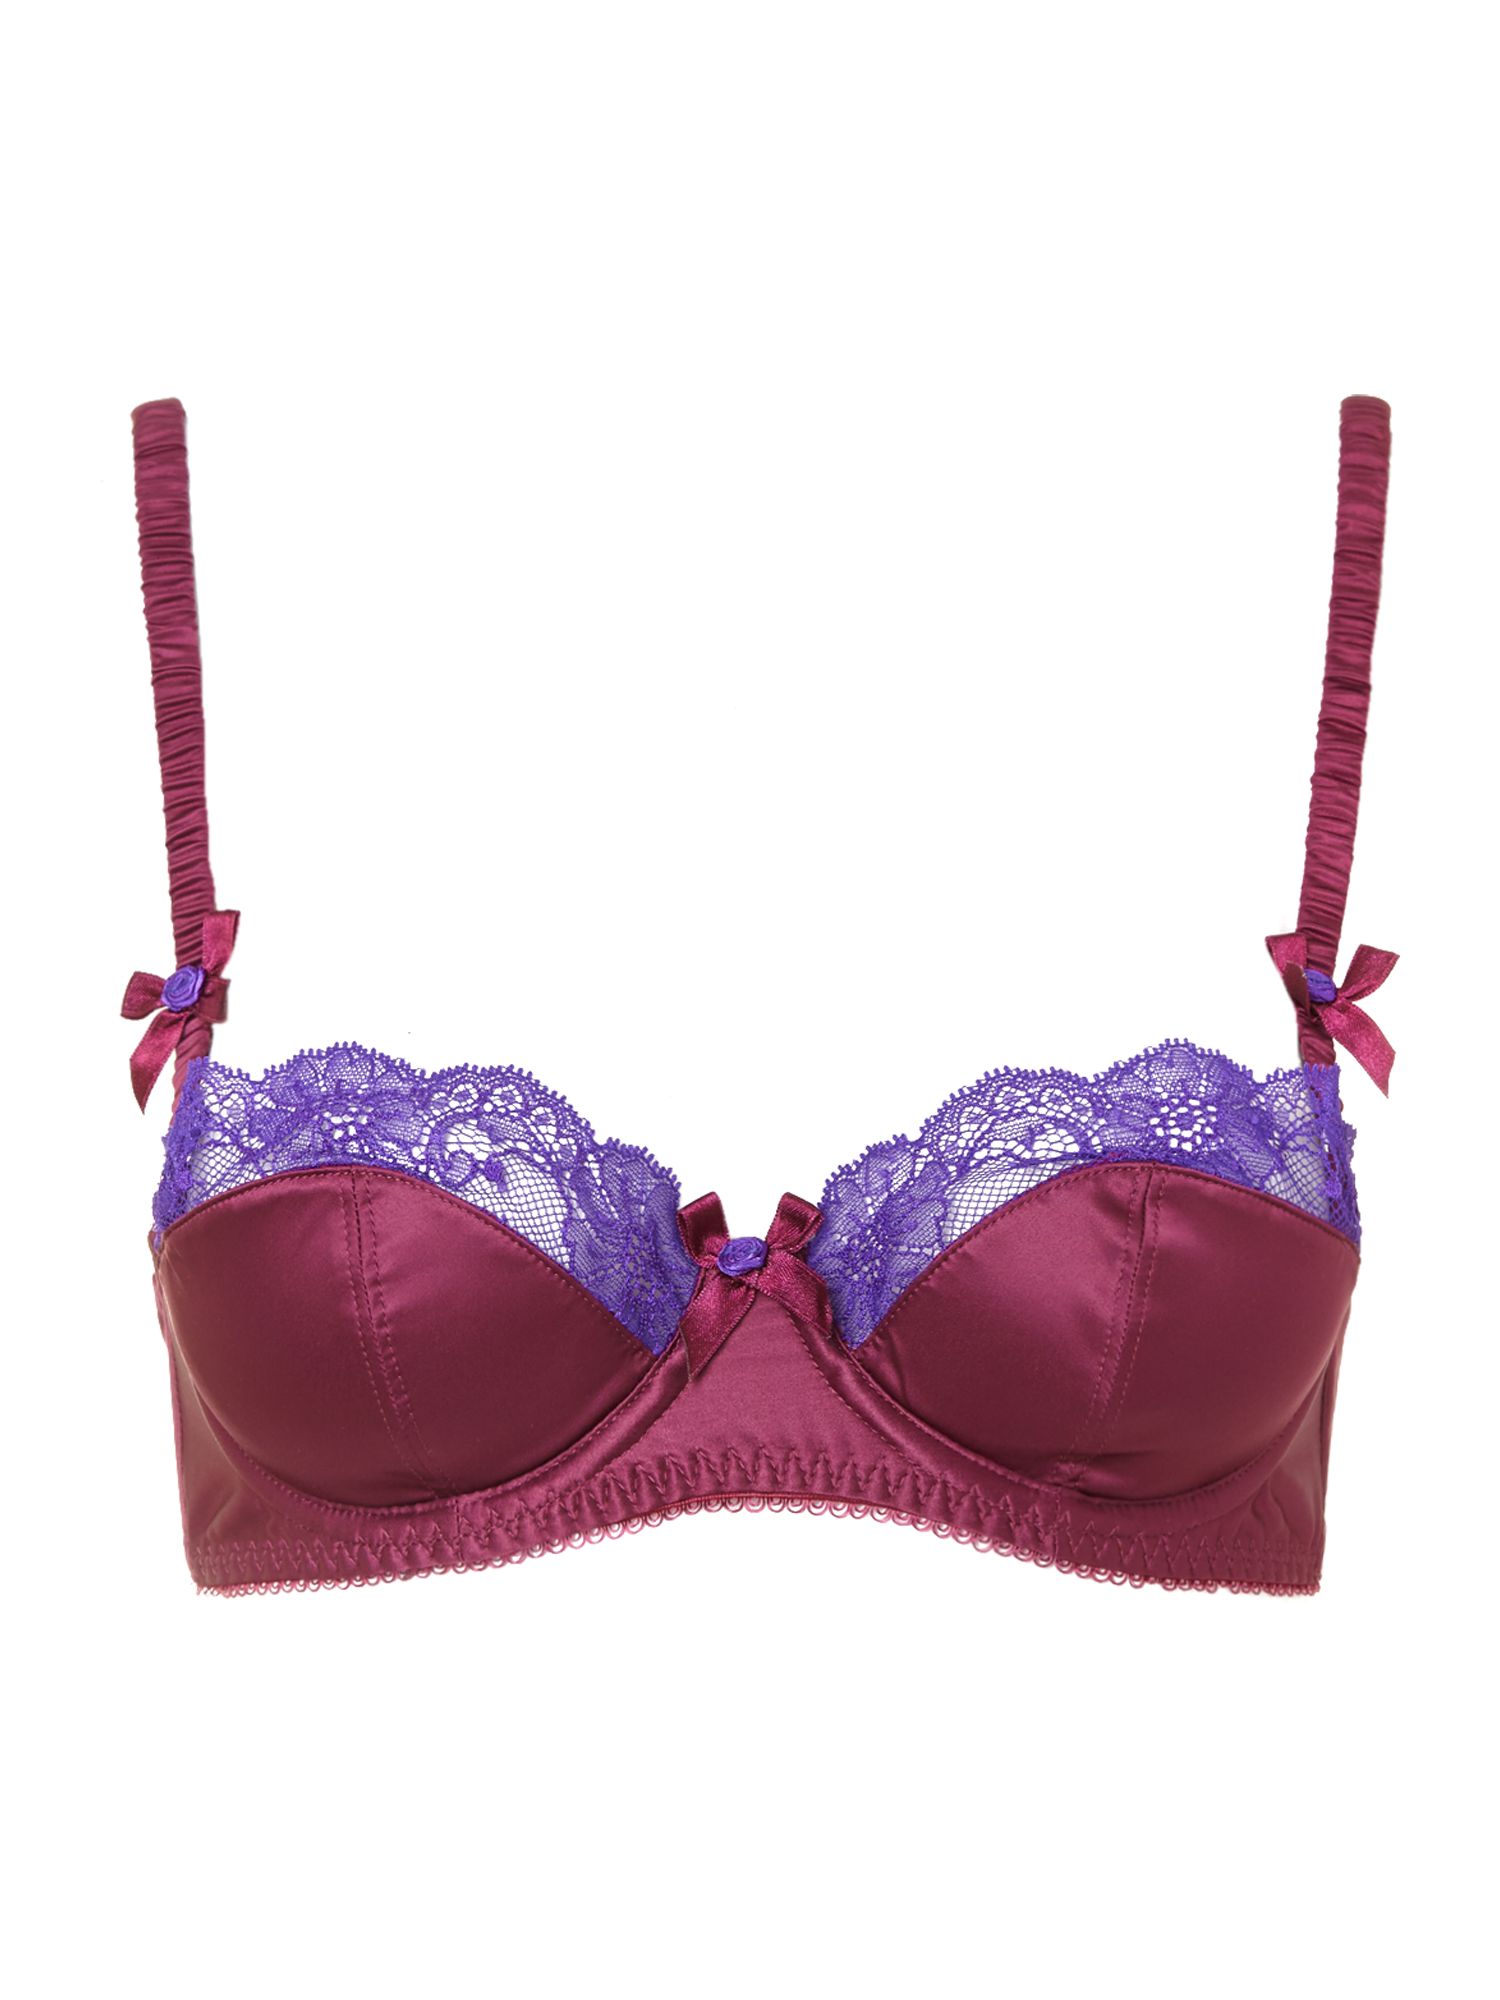 Agent Provocateur Marisela Padded Balcony Bra in Red (Plum) | Lyst